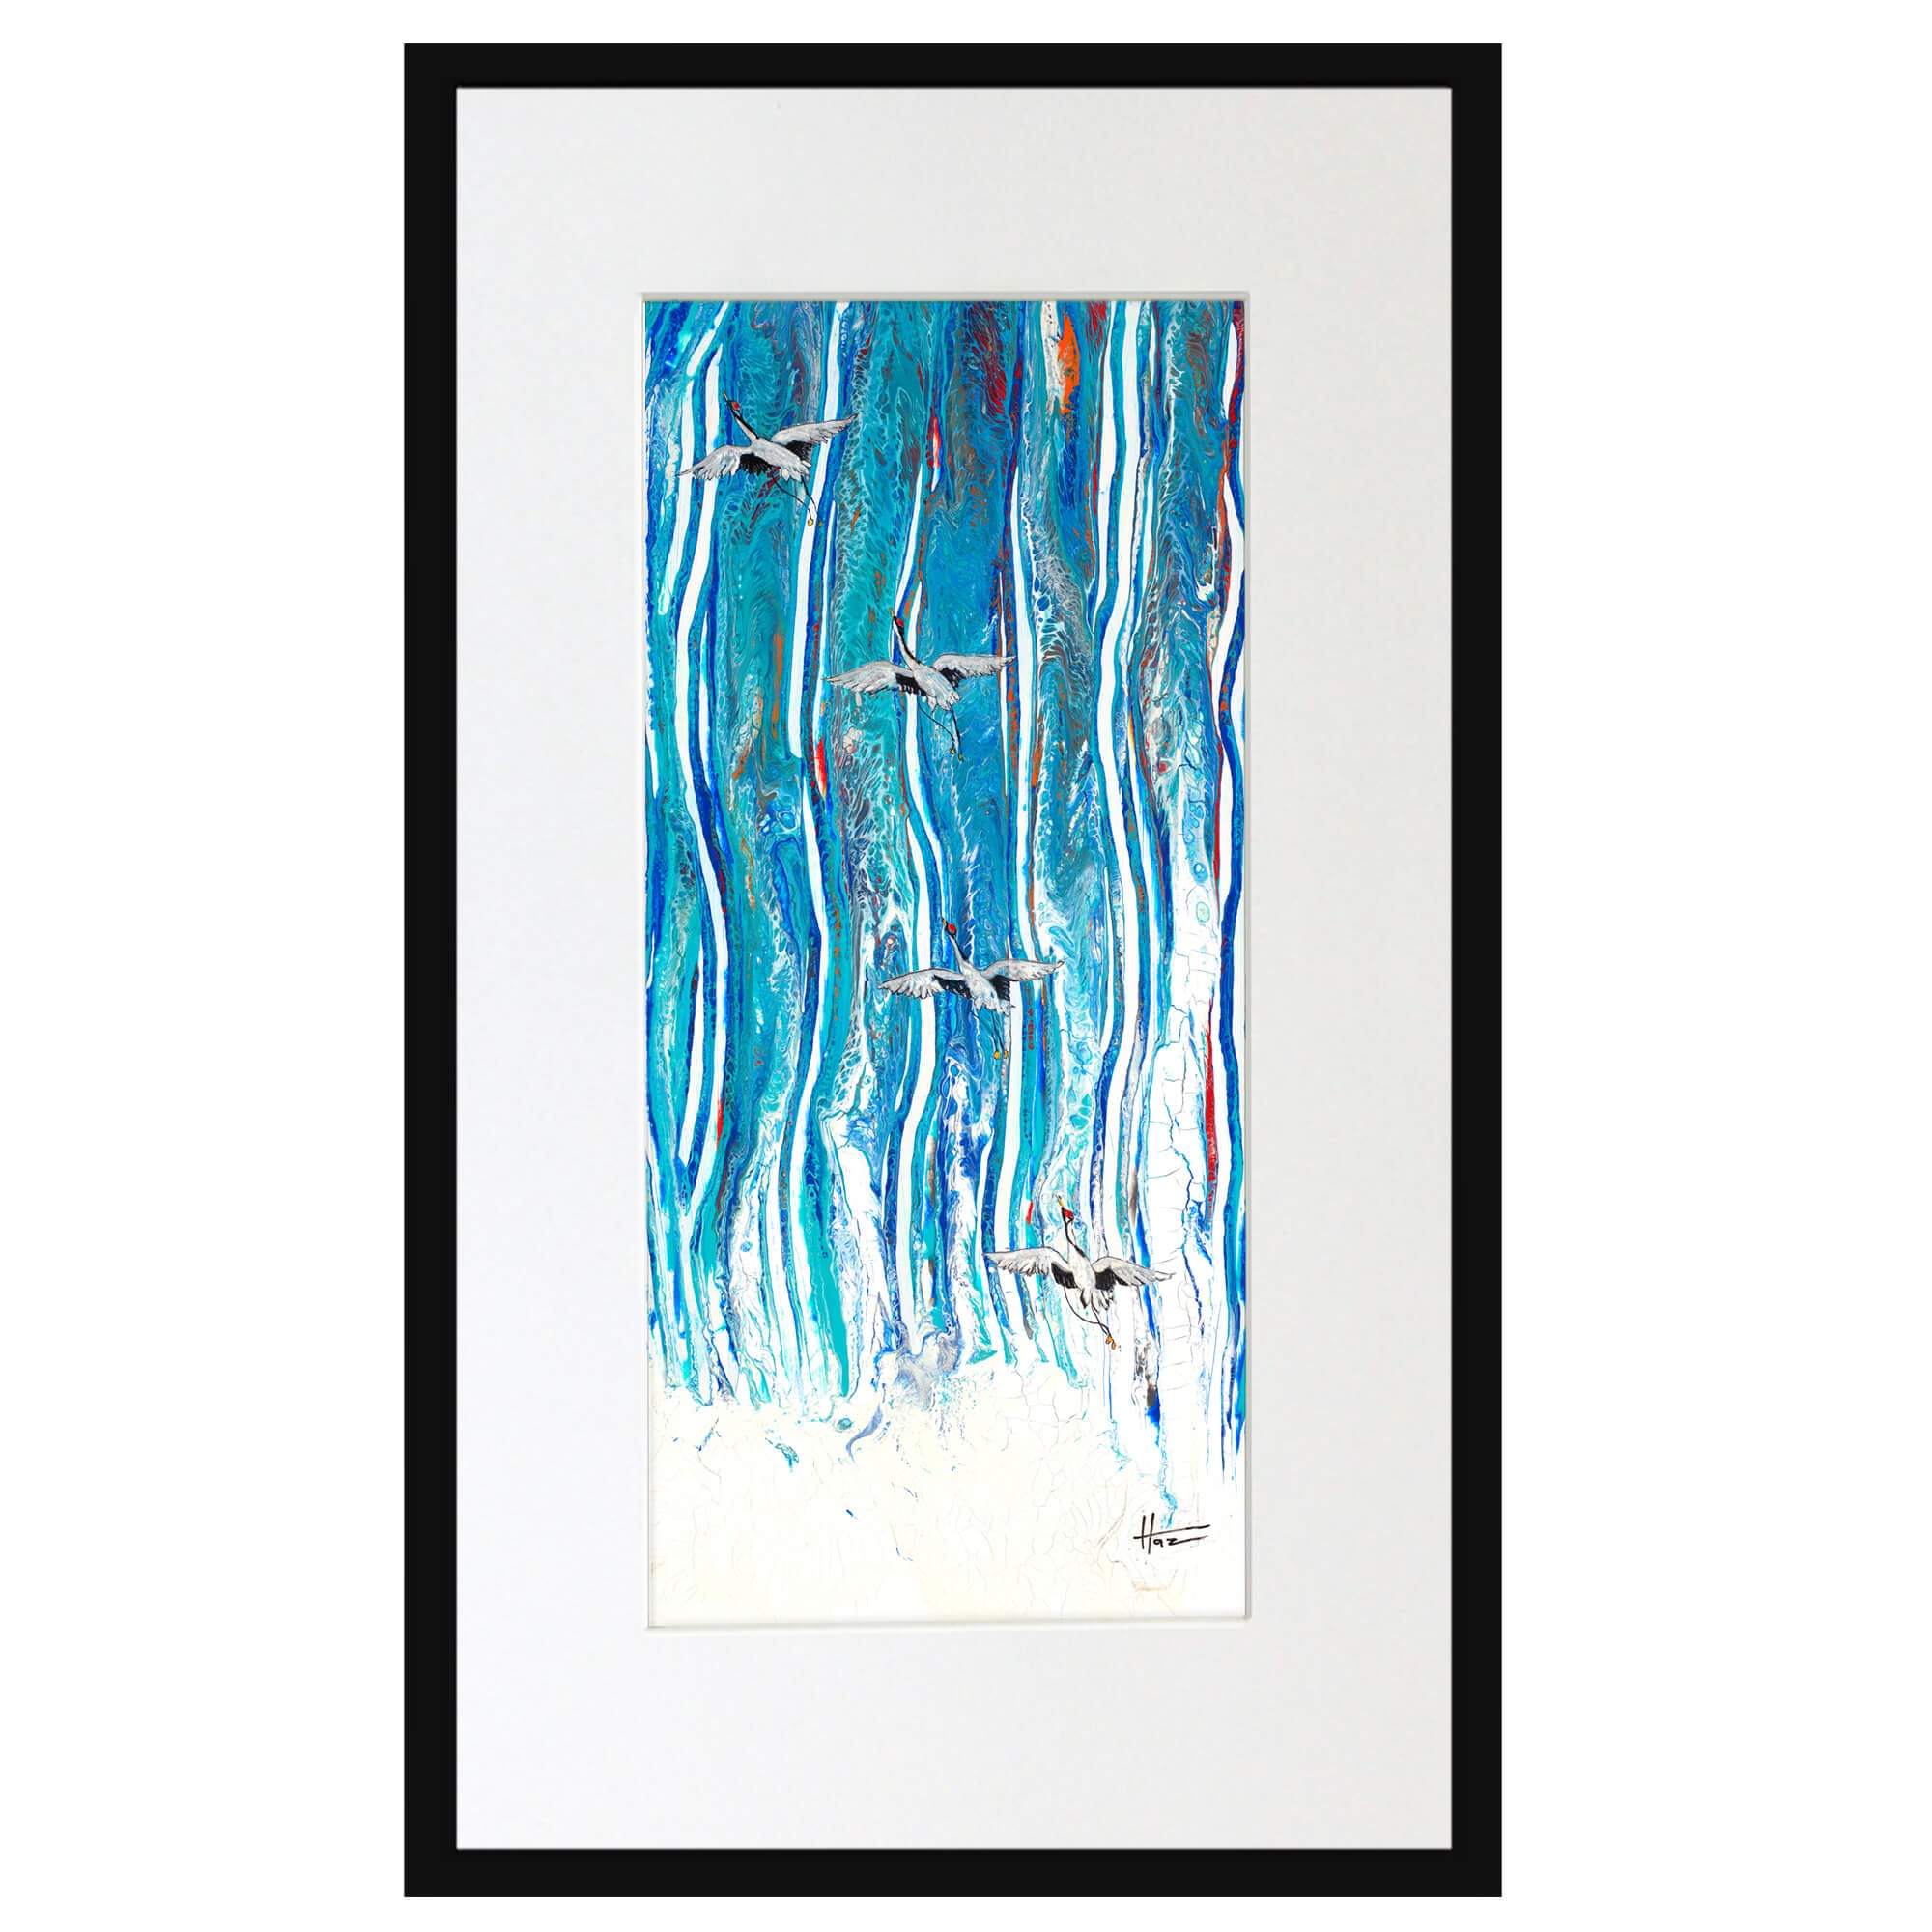 Matted art print with black frame illustrating the crane's  long legs trailing behind it as it glides effortlessly through the air by hawaii artist Robert Hazzard